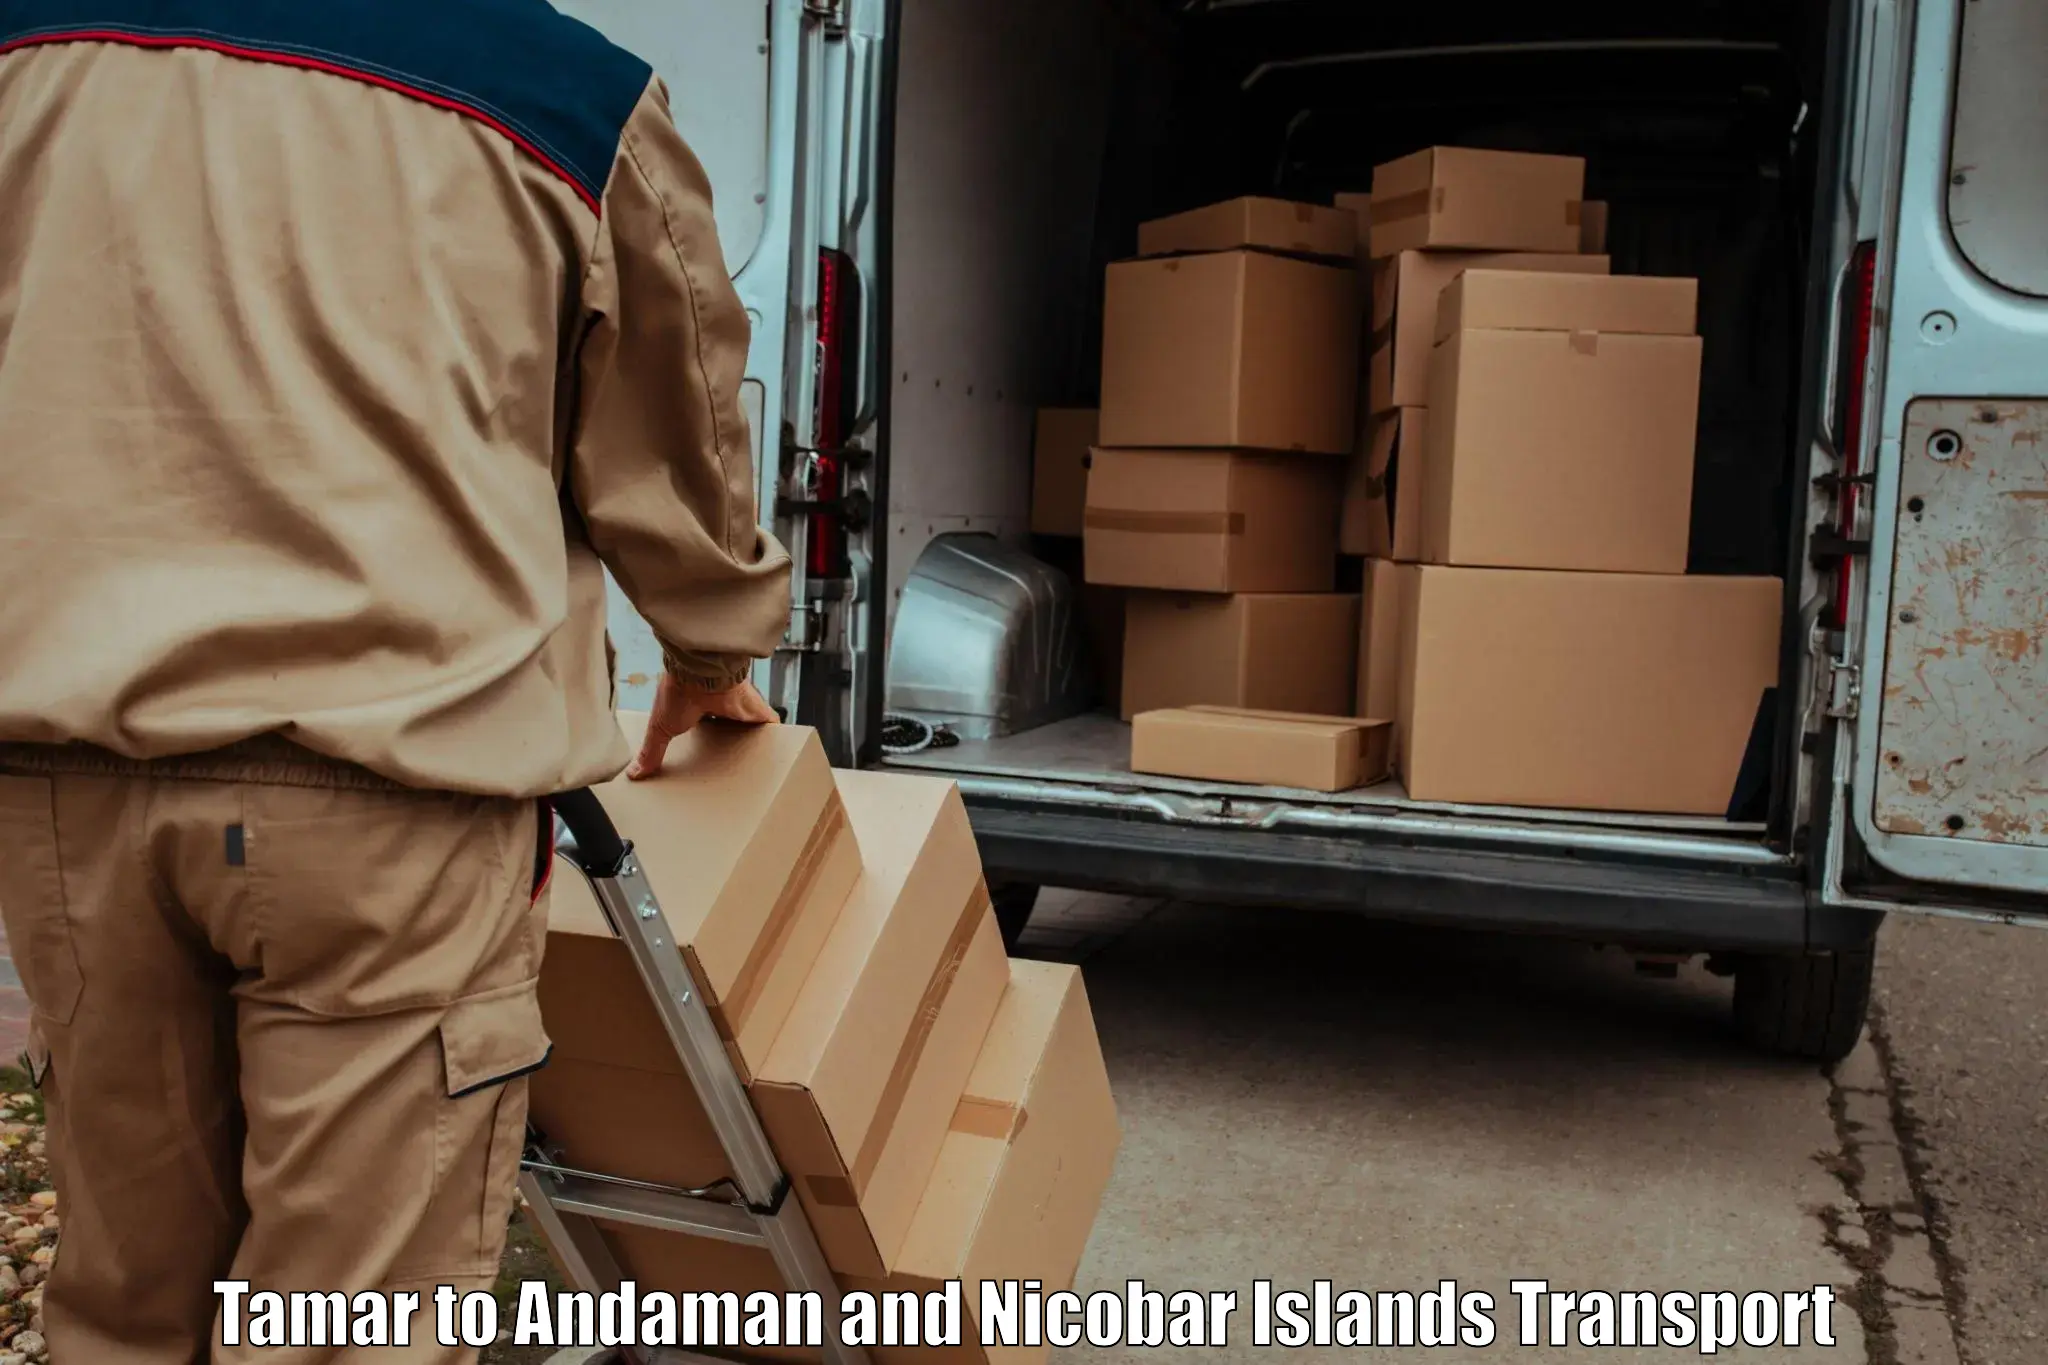 Road transport services in Tamar to Andaman and Nicobar Islands